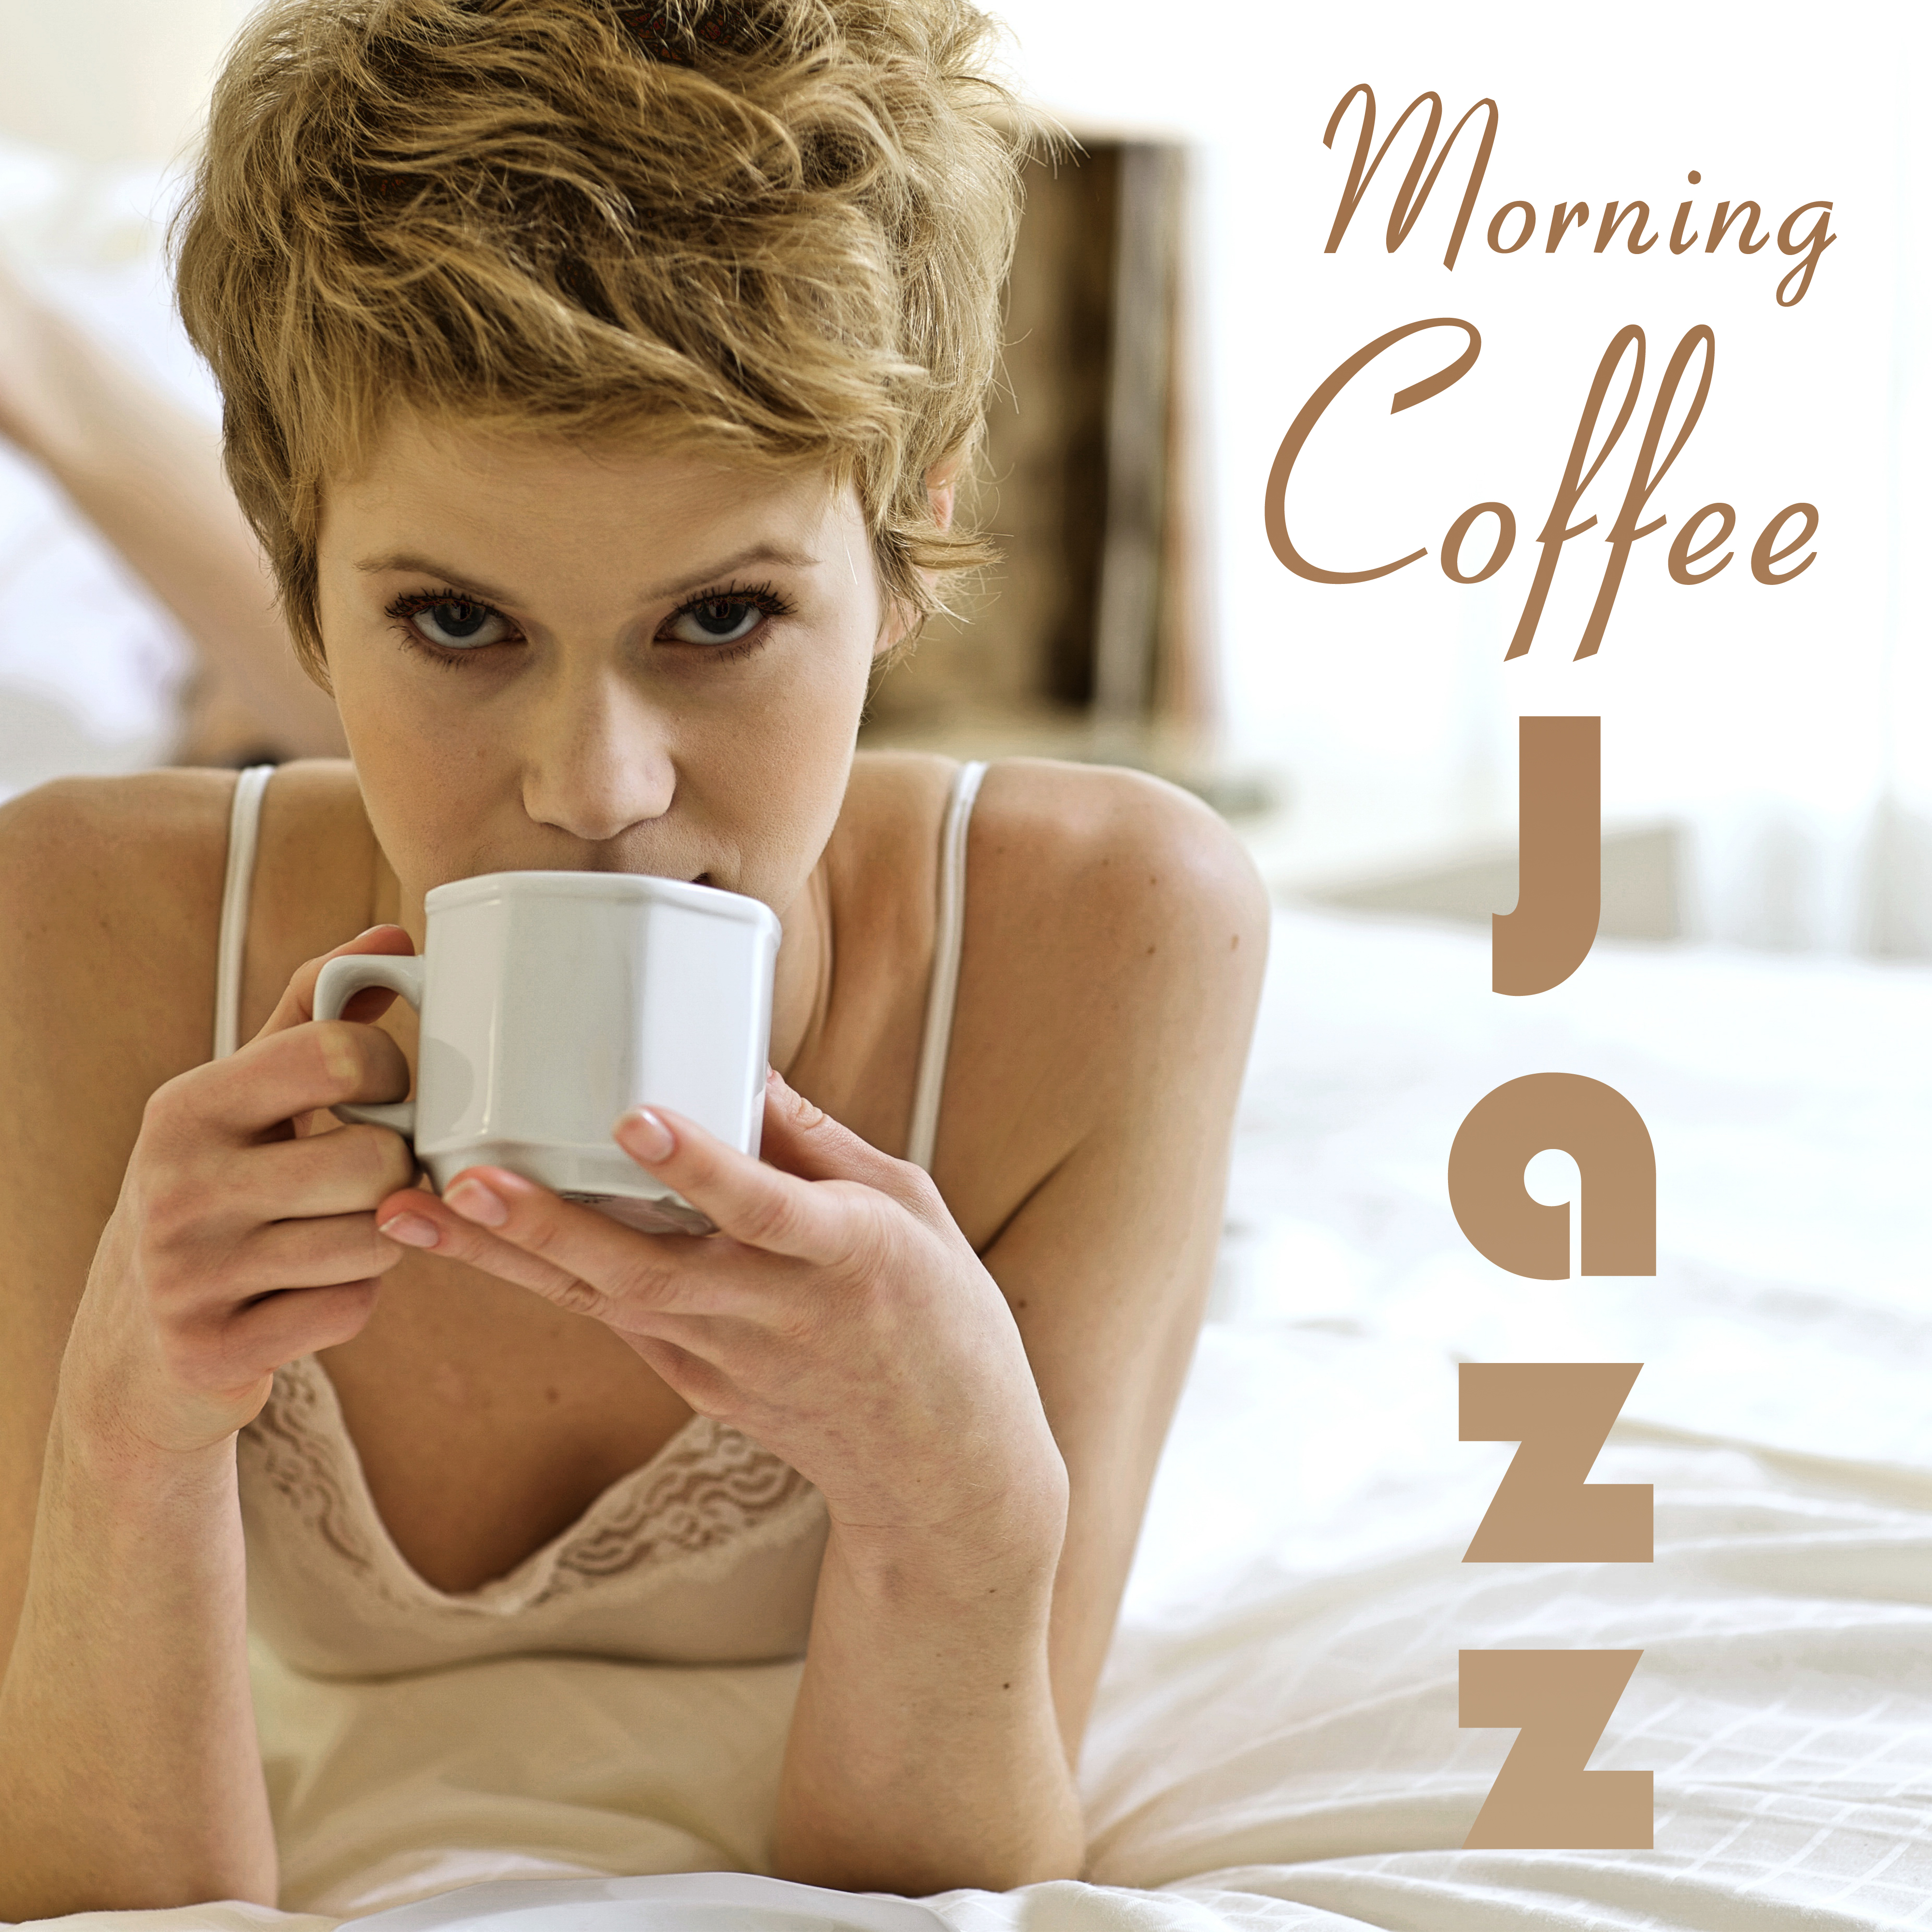 Morning Piano Music - Calm Music for Waking Up, Morning Background Songs